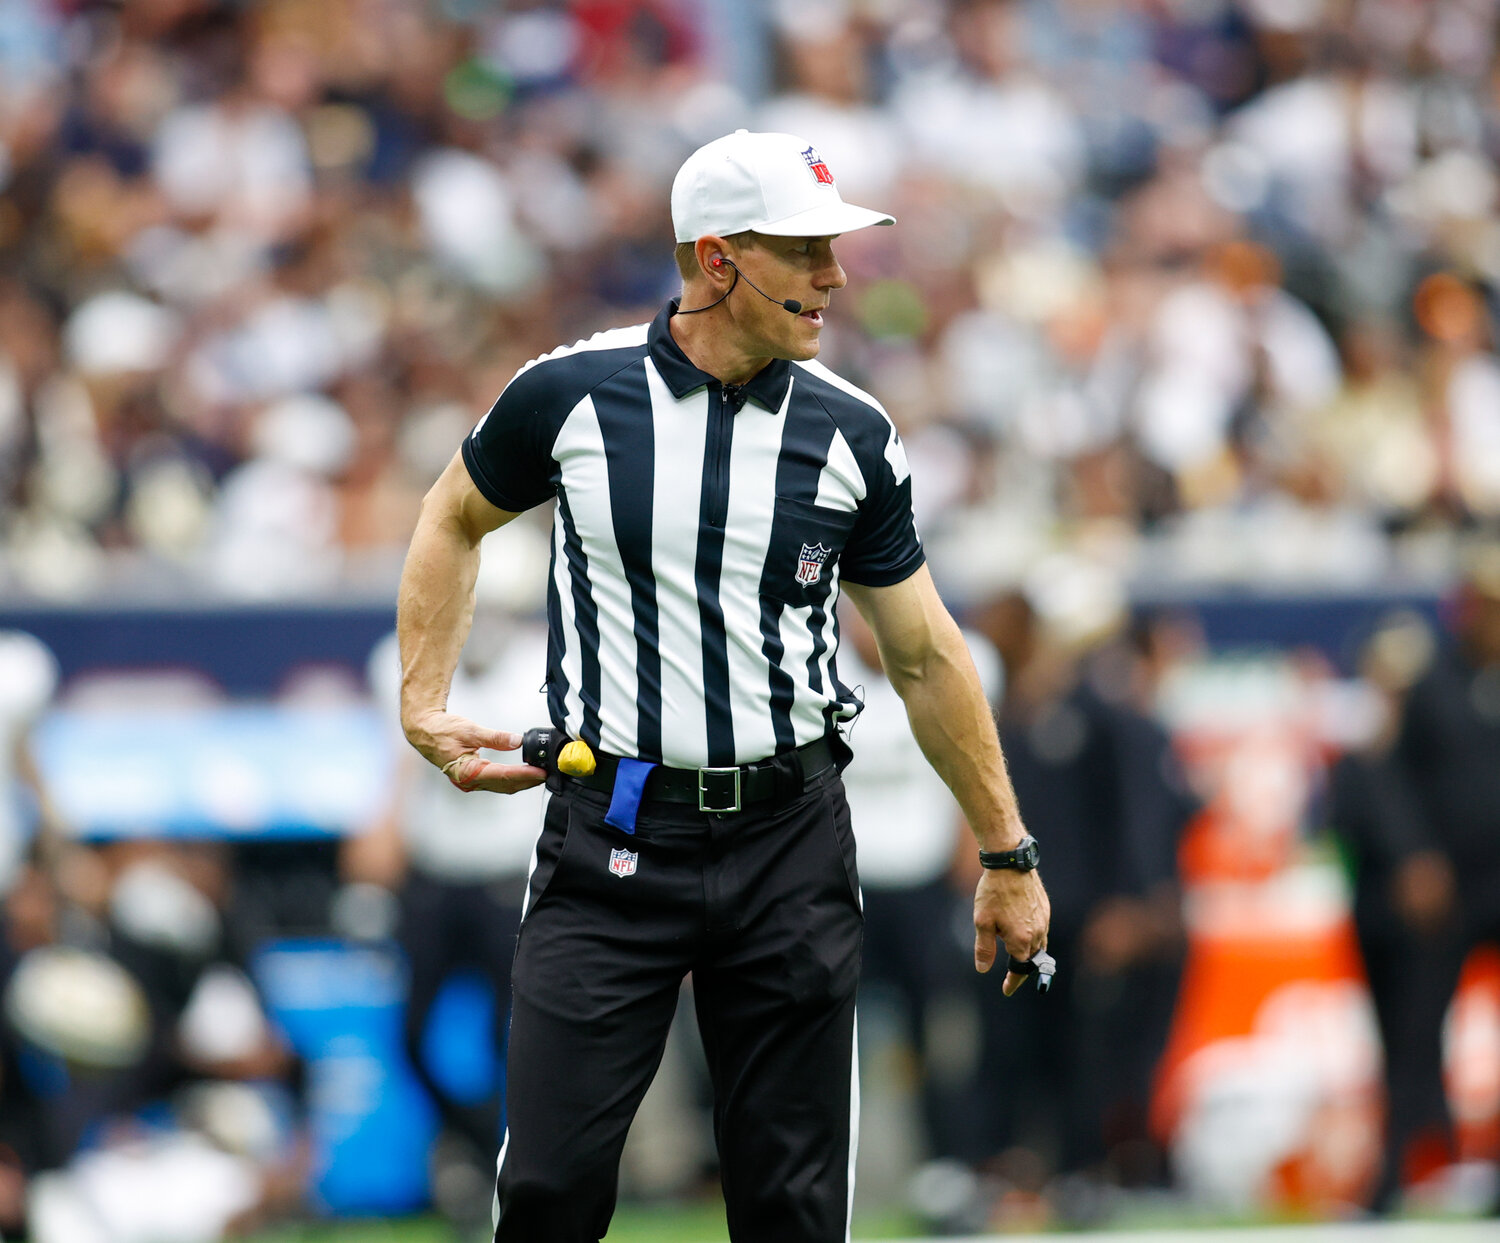 Referee Alan Eck (76) during an NFL between the Texans and the Saints on October 15, 2023 in Houston. The Texans won, 20-13.